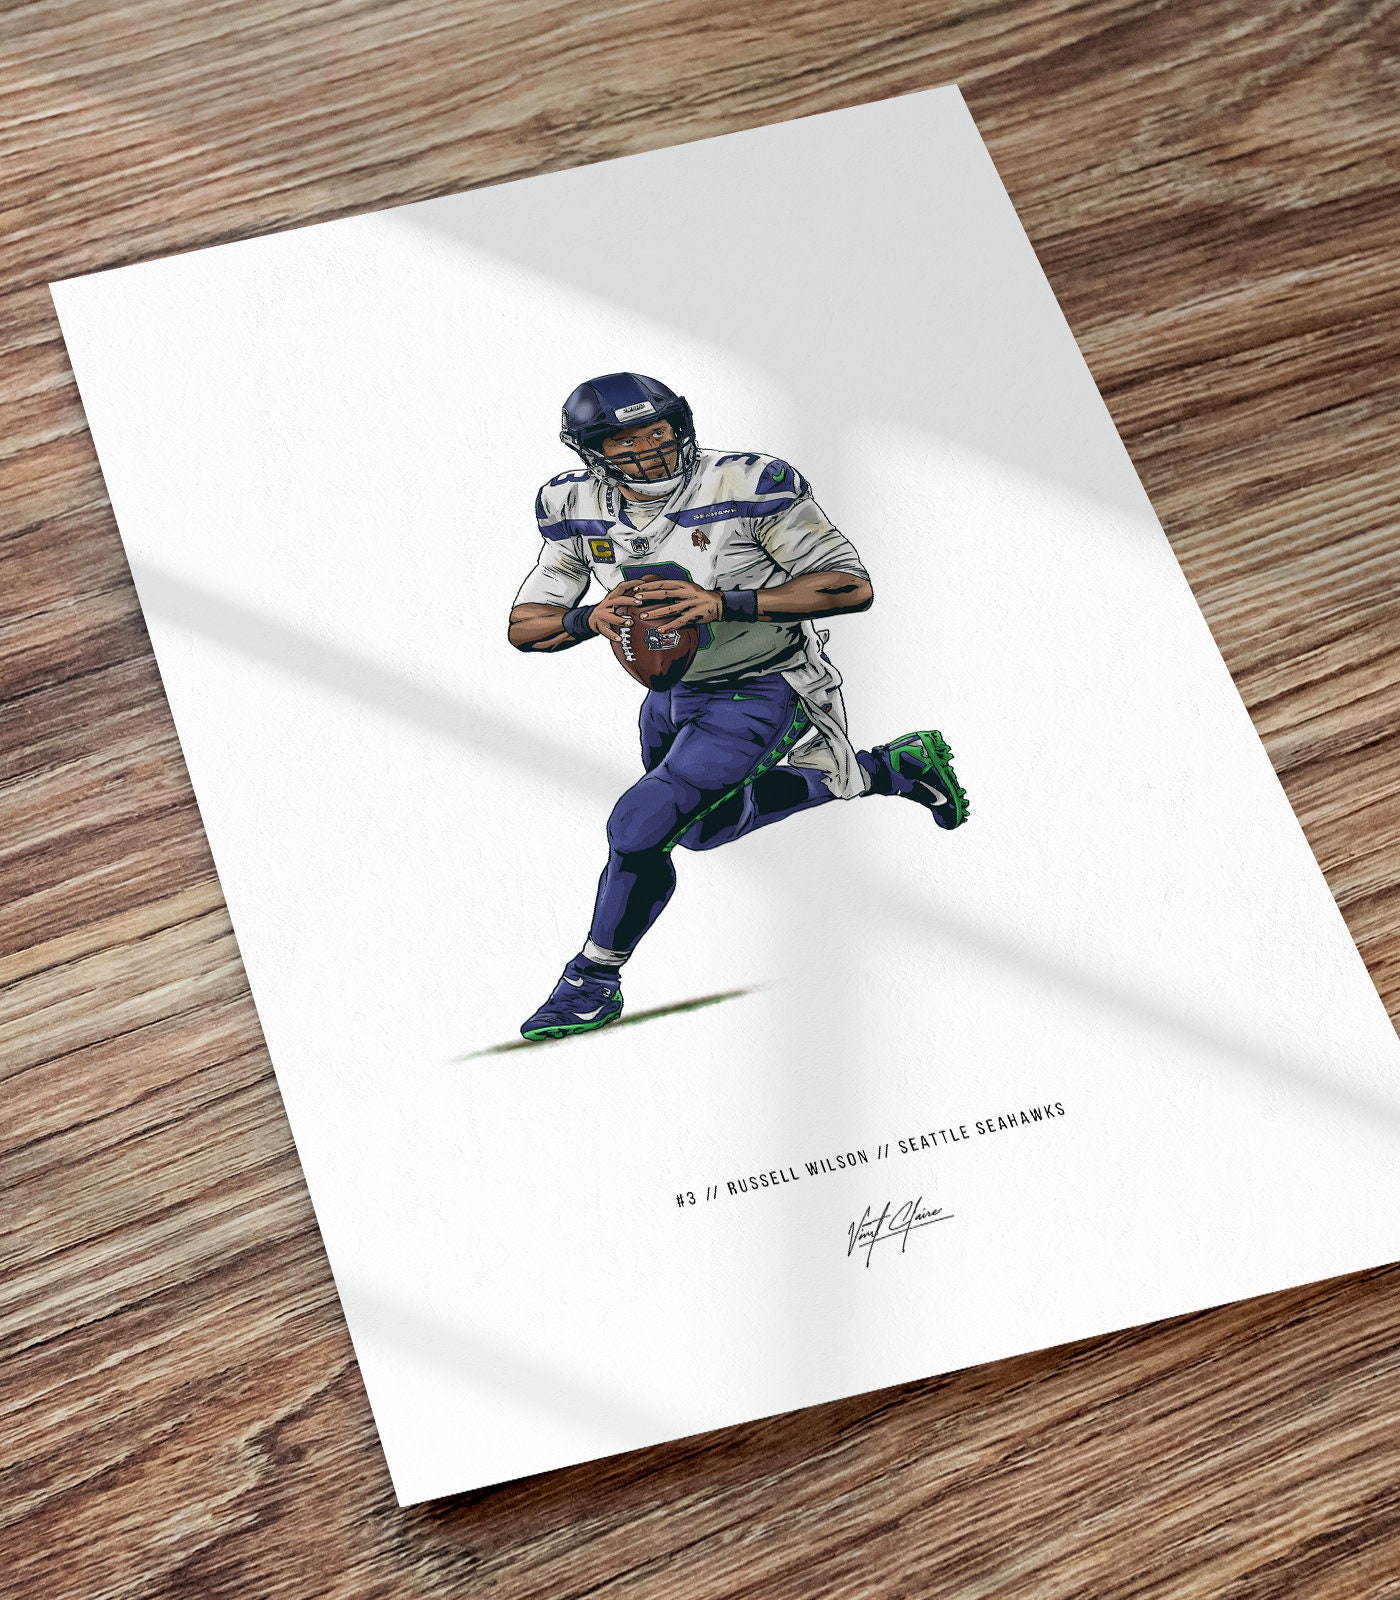 Russell Wilson Autographed Seattle Seahawks Super Bowl Full Size Helme –  Russell Wilson Direct